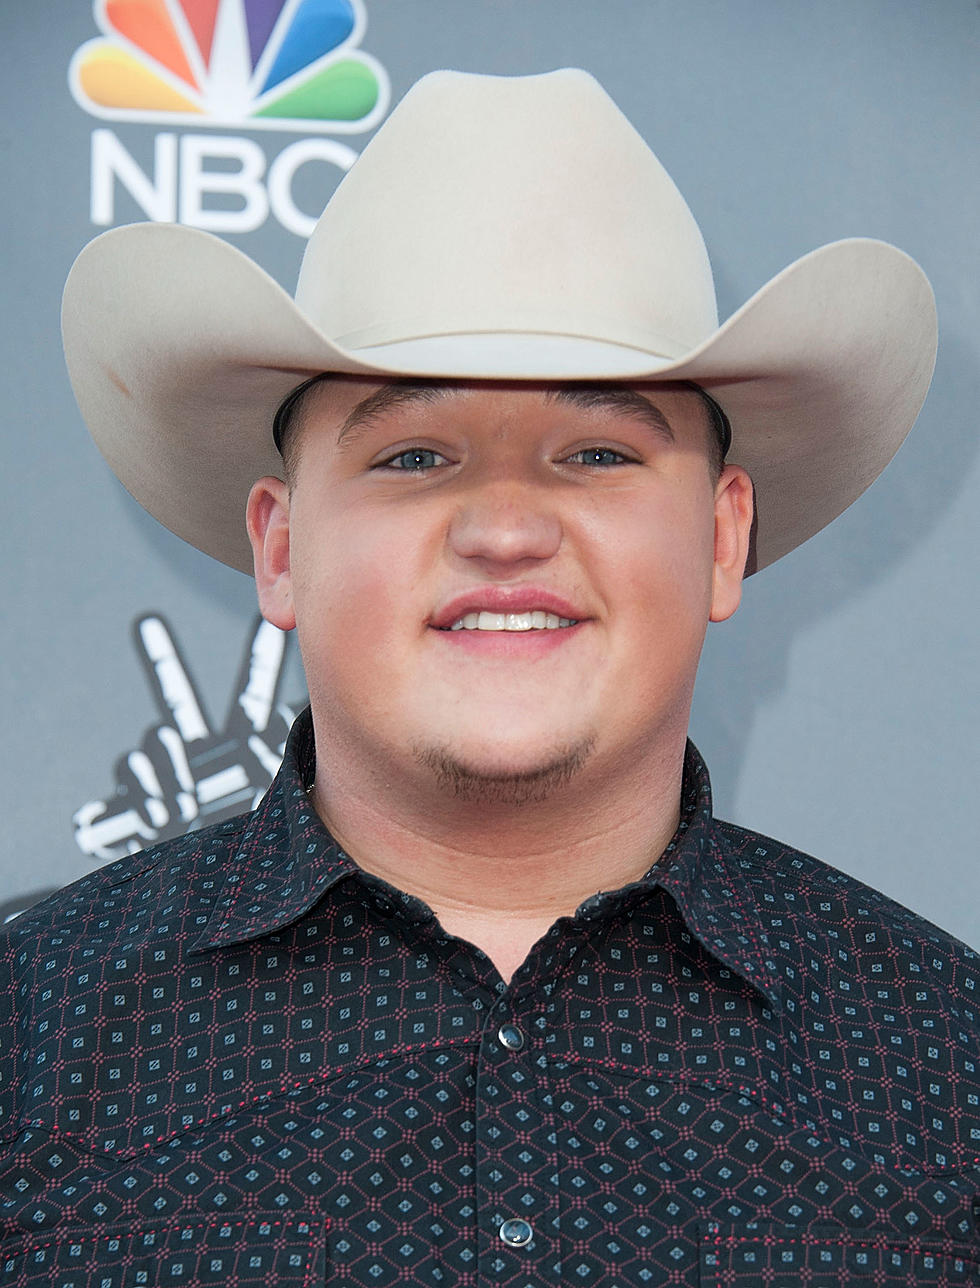 Jake Worthington Sang His Heart Out Last Night on ‘The Voice’ [VIDEO]